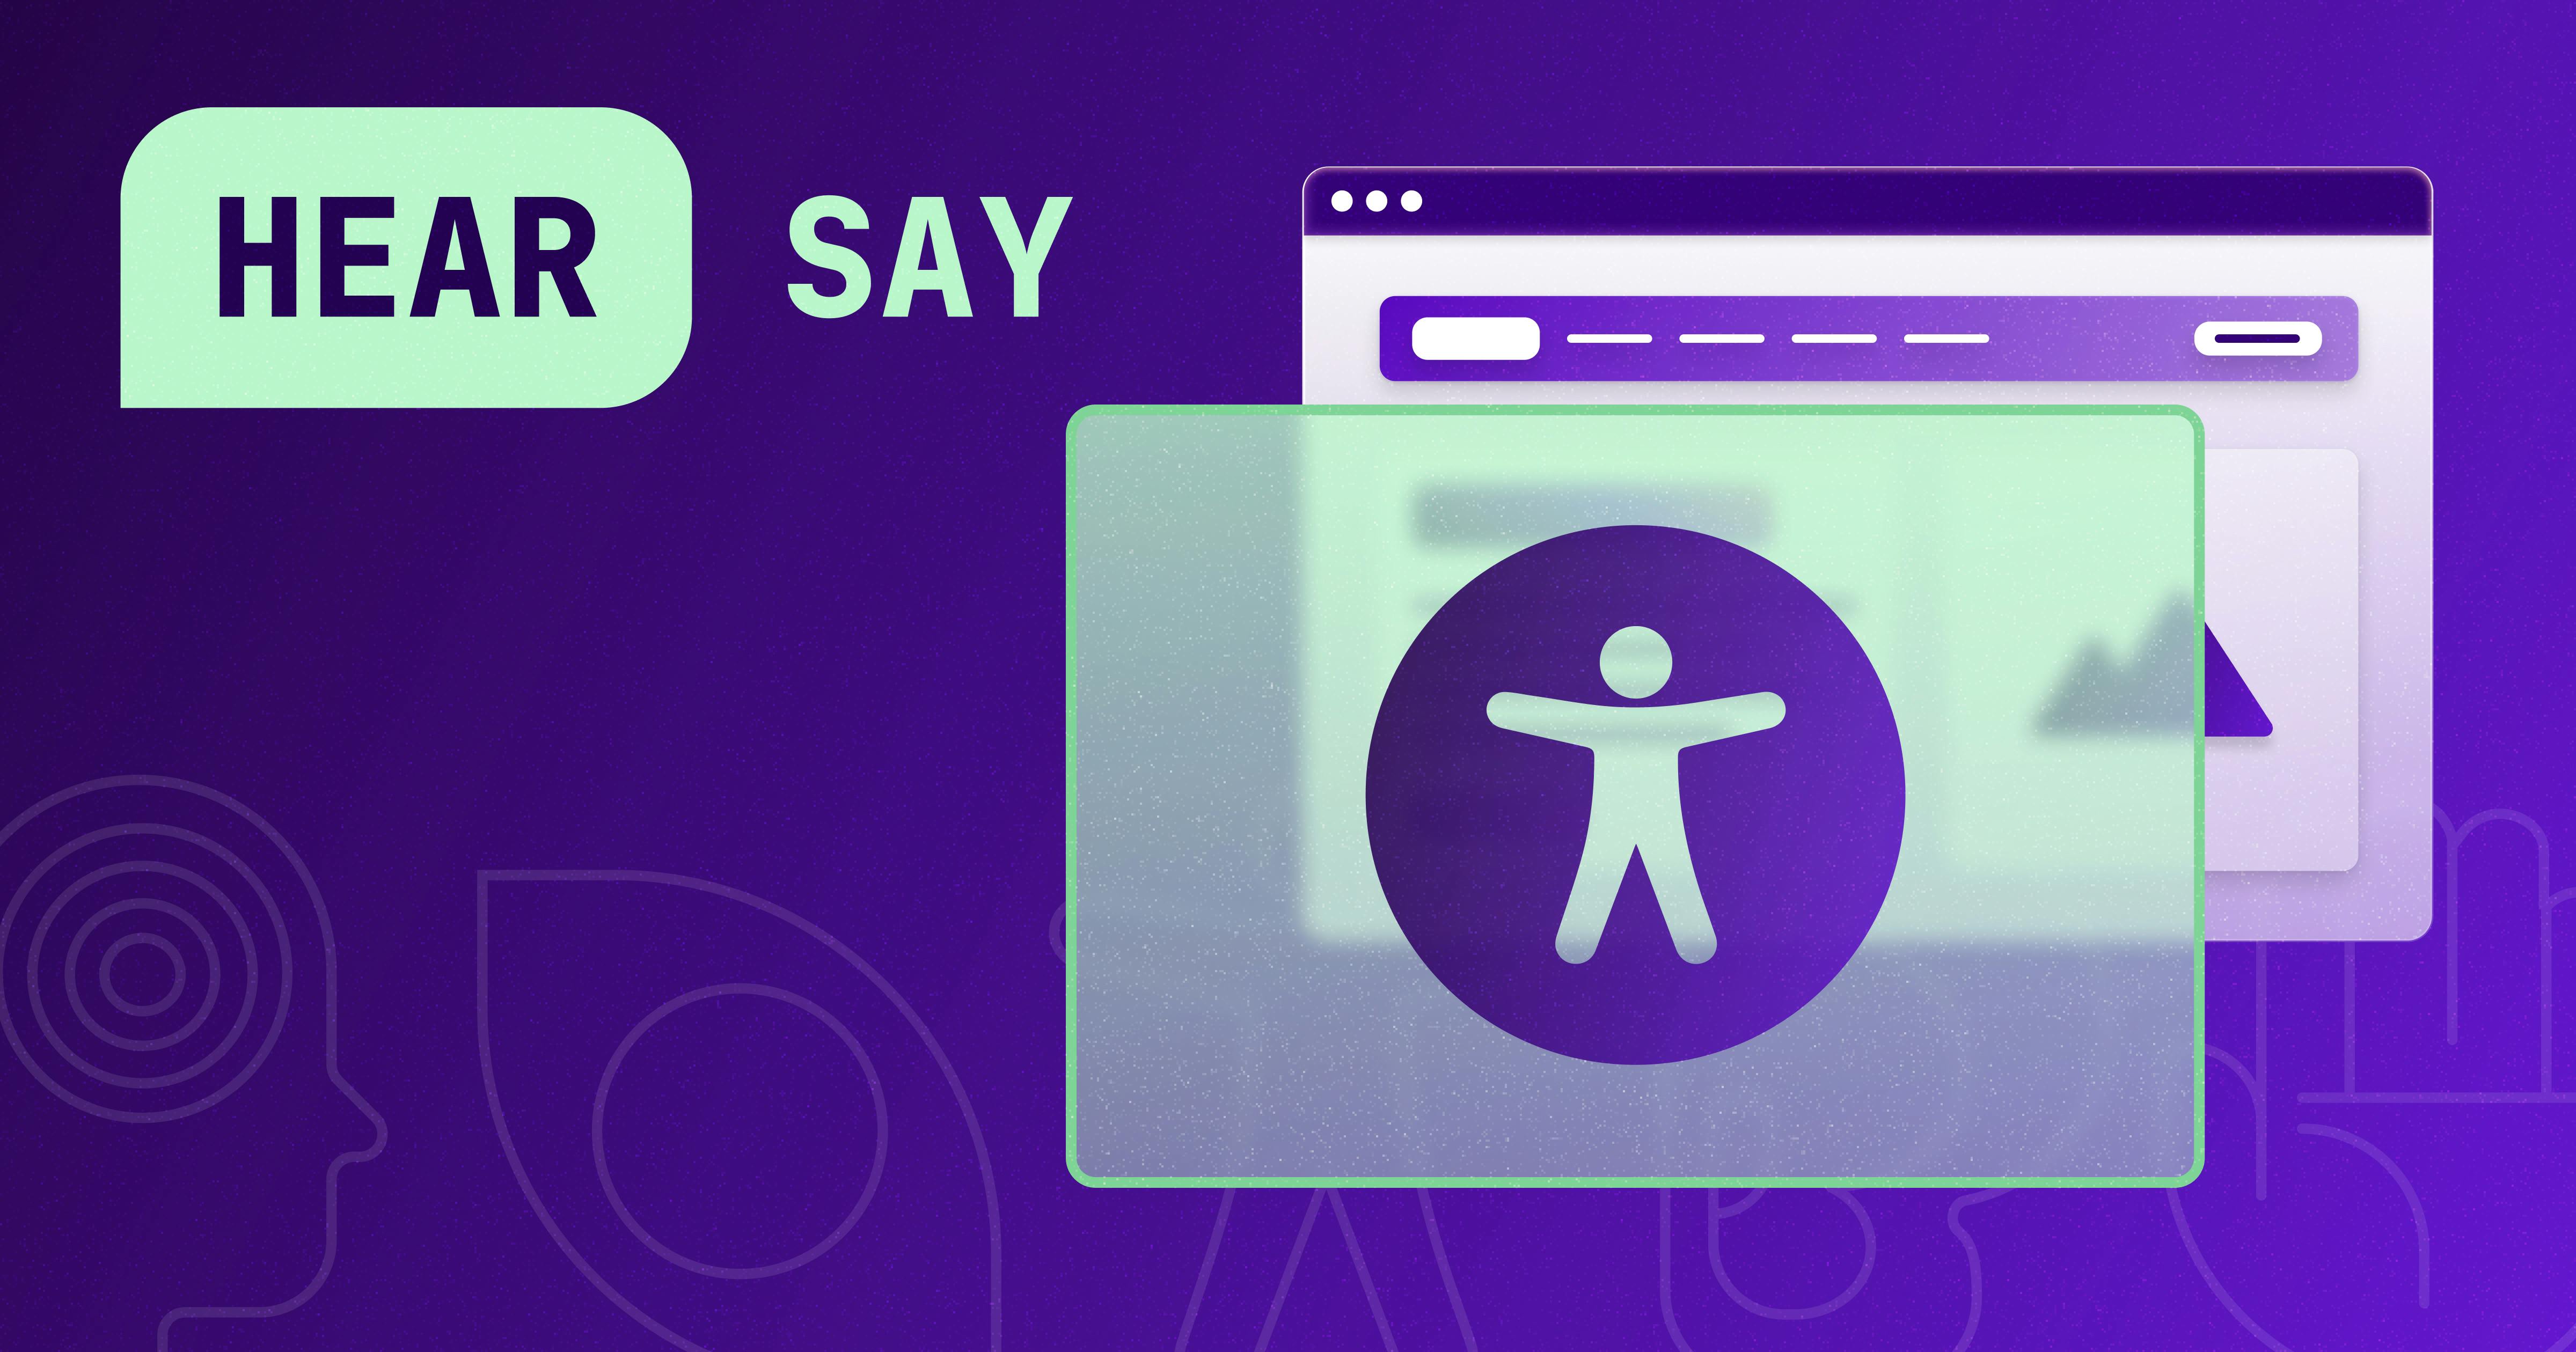 A purple accessibility icon overlaid on a stylized web browser. The purple background has icons representing different types of disabilities, with a label in the upper left corner that reads "HEAR SAY"